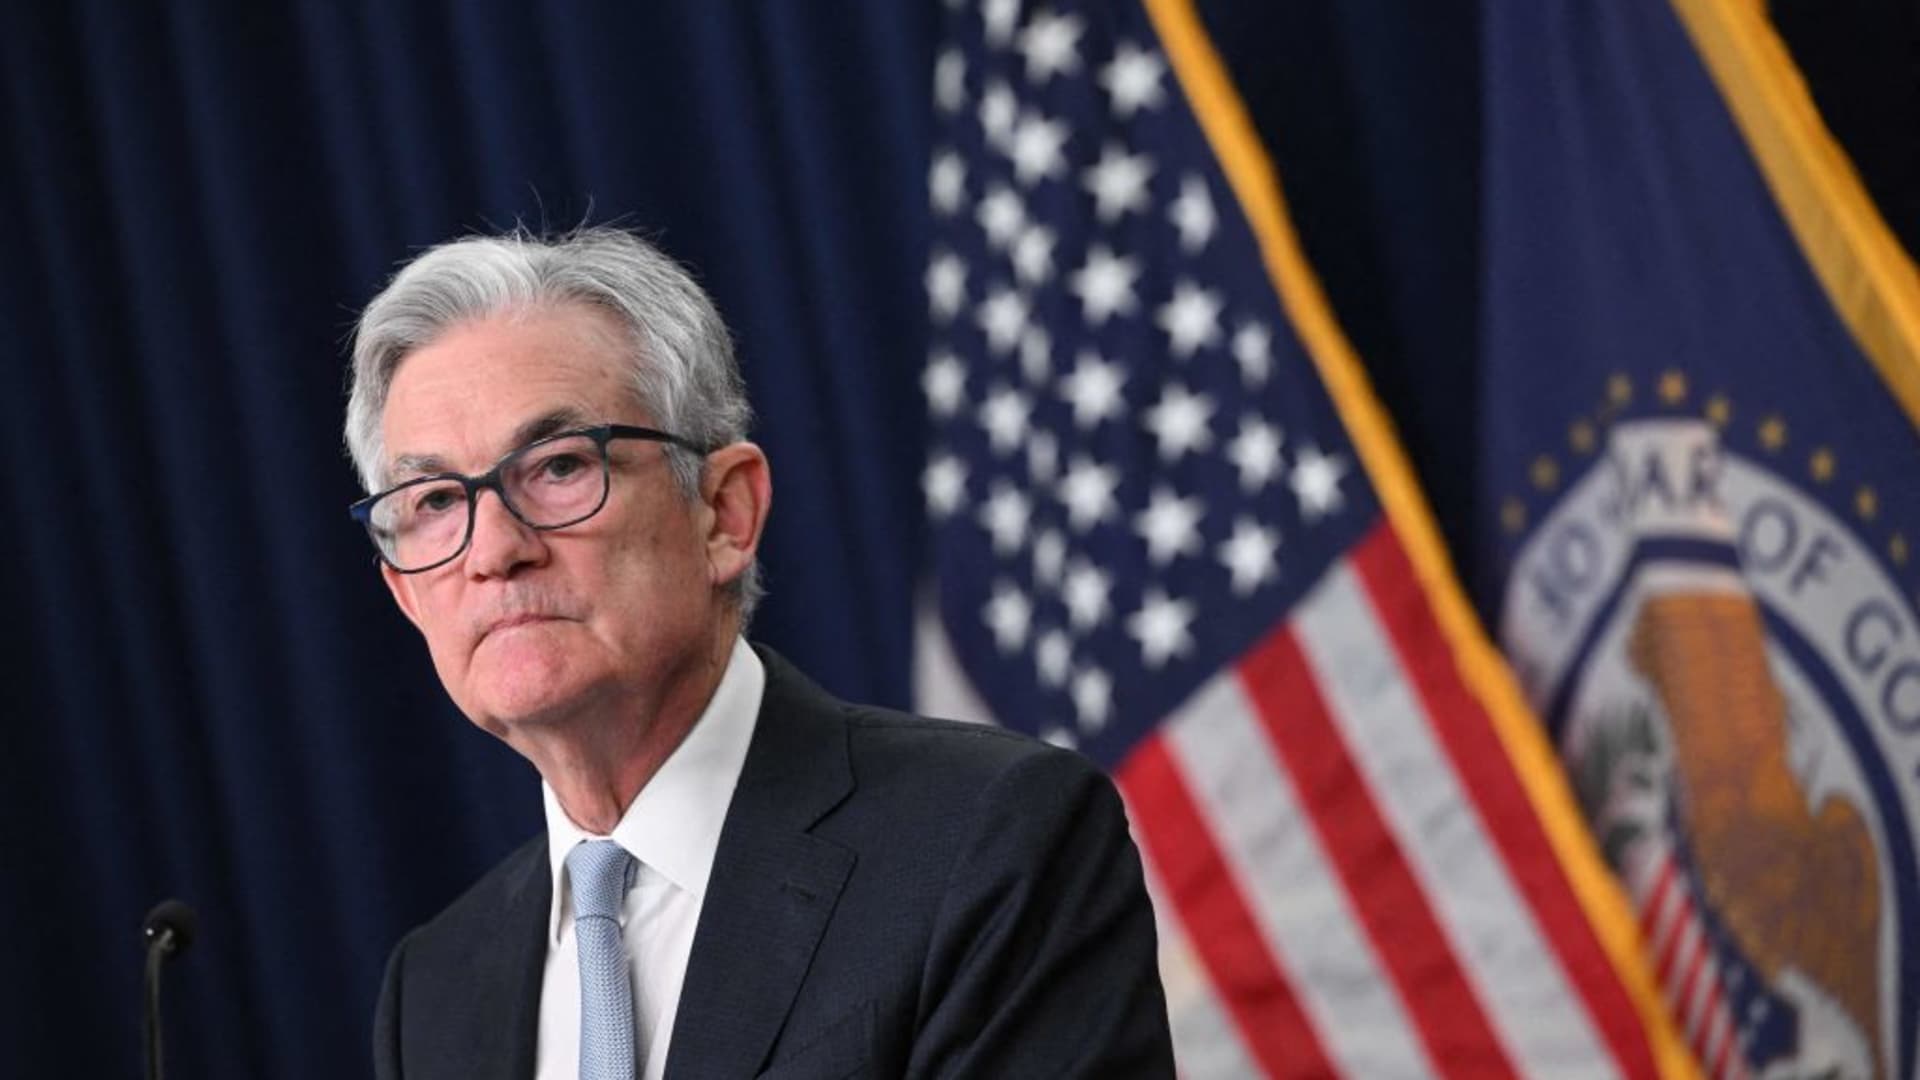 The Fed expects more rate hikes, despite a smaller 50 basis point increase: 'We still have a long way to go'